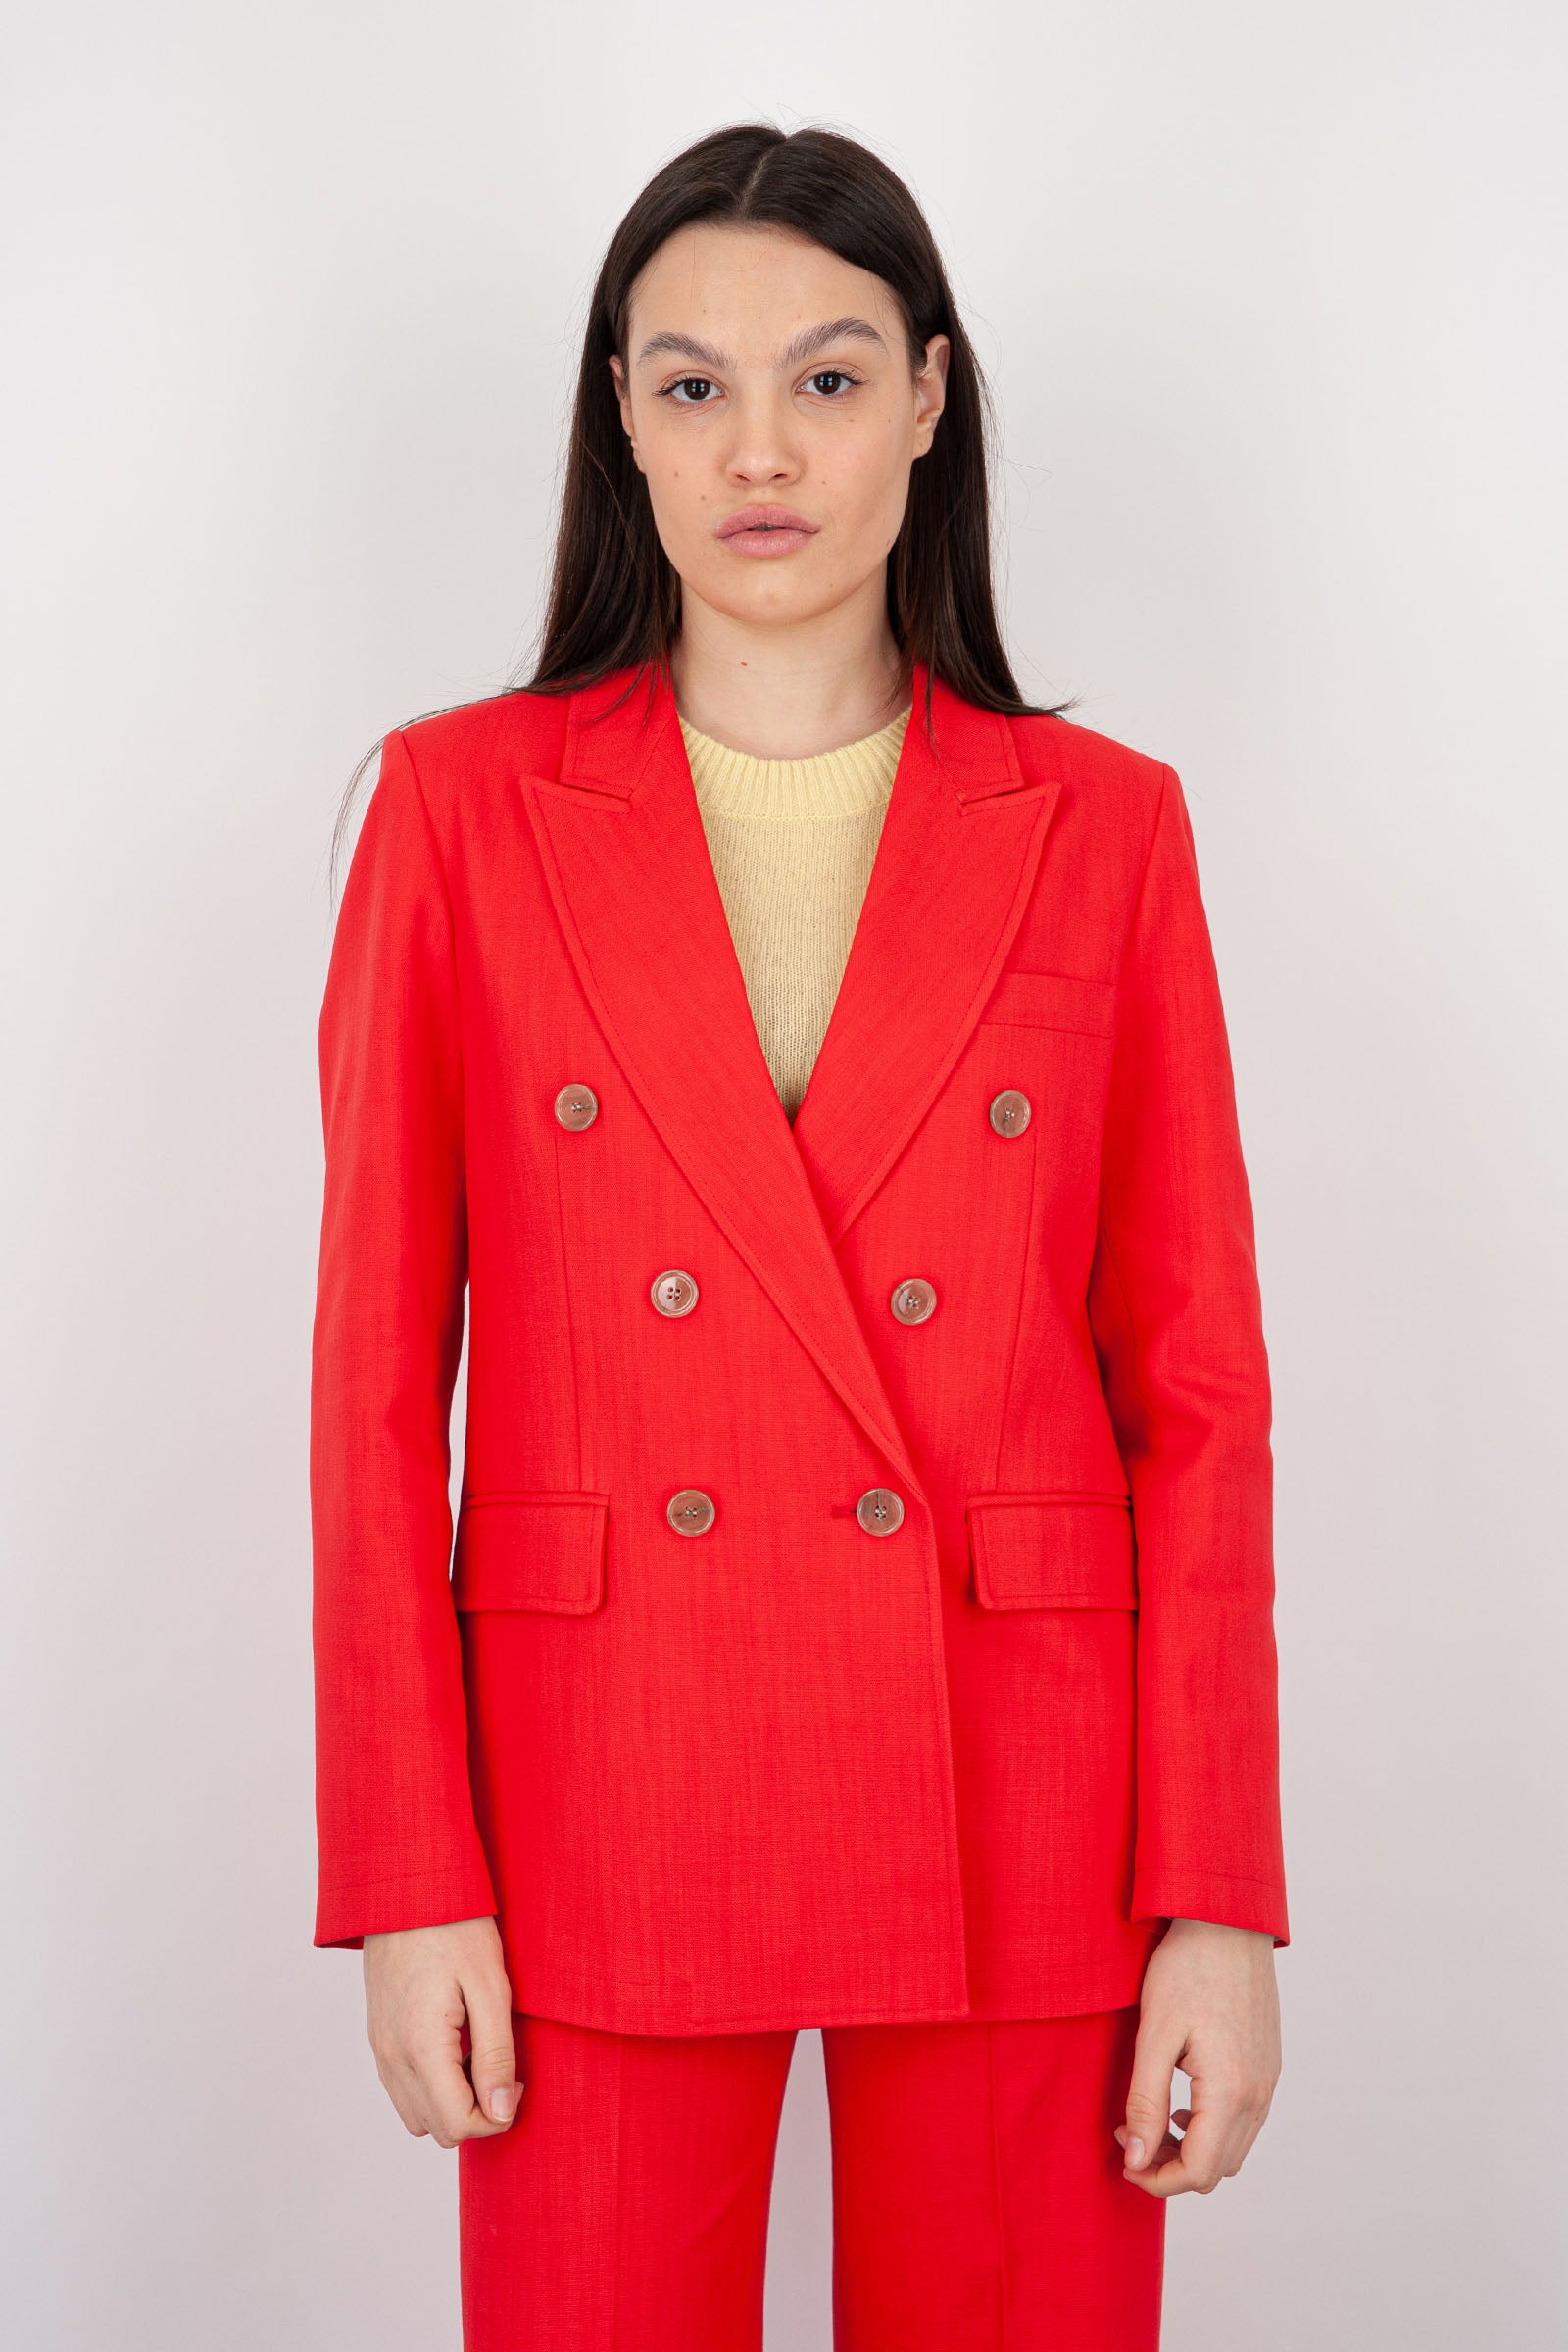 Department Five Synthetic Double-Breasted Coral Blazer - 1